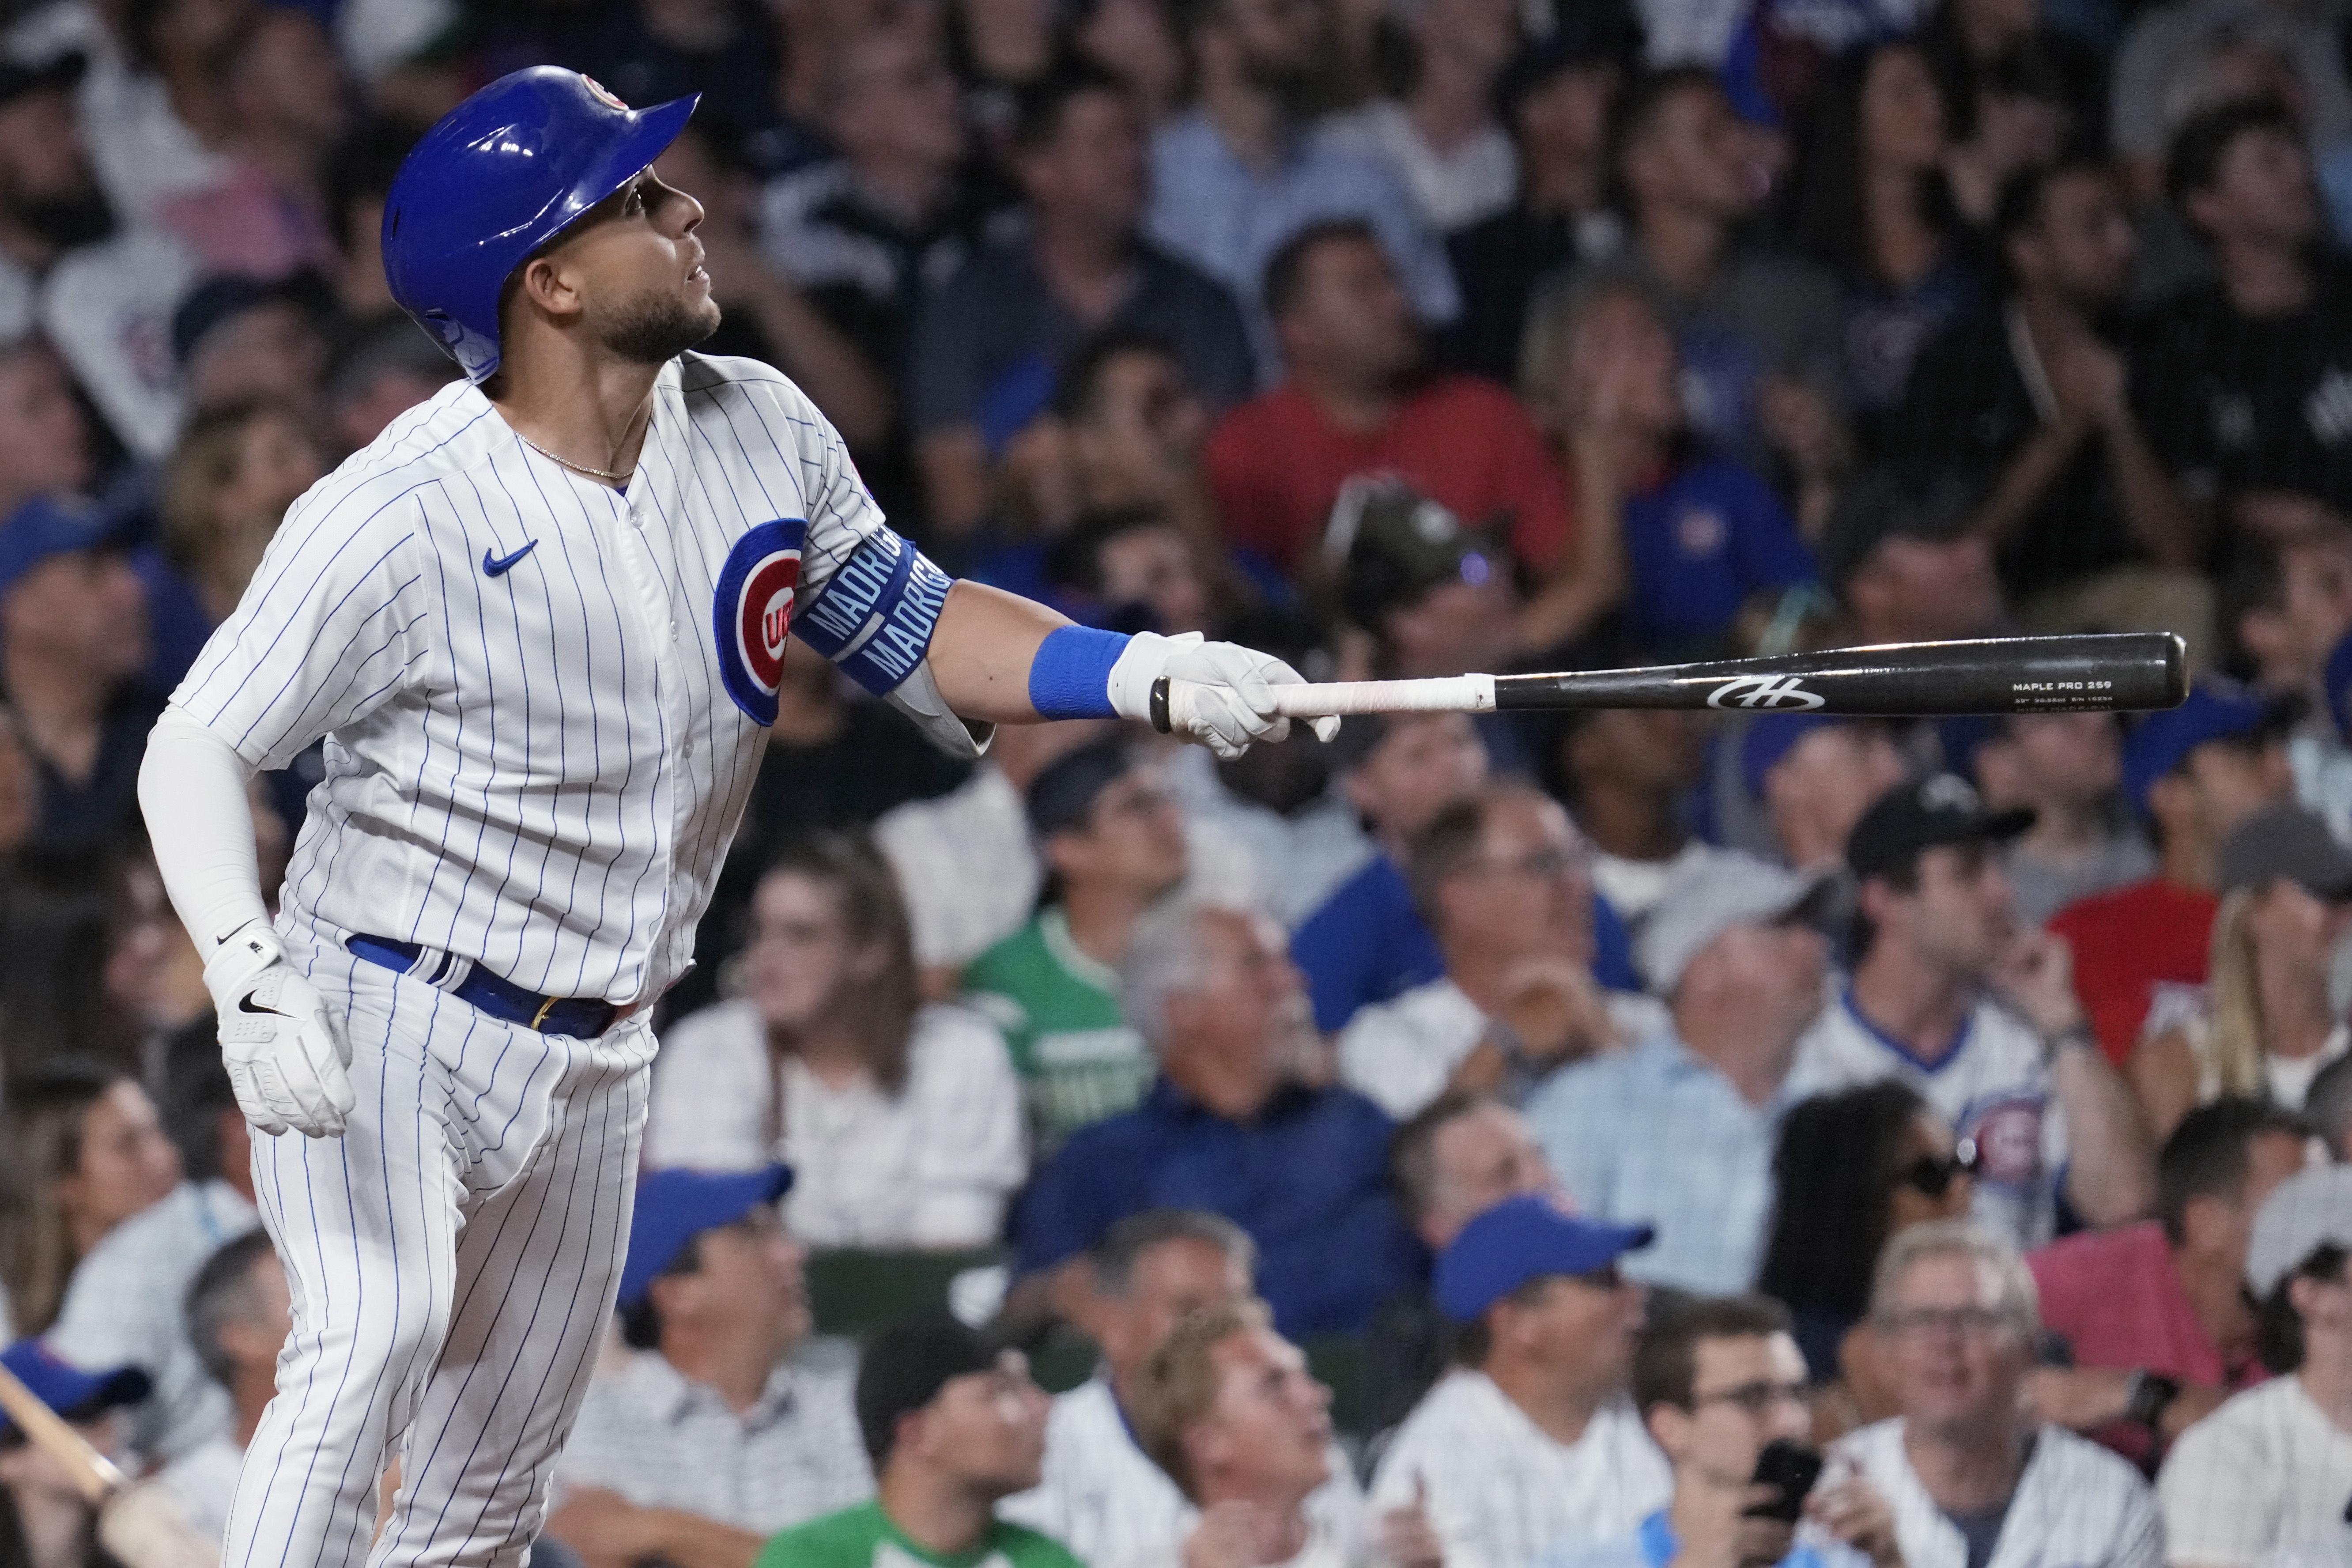 Should the Cubs use Nick Madrigal as a designated hitter?